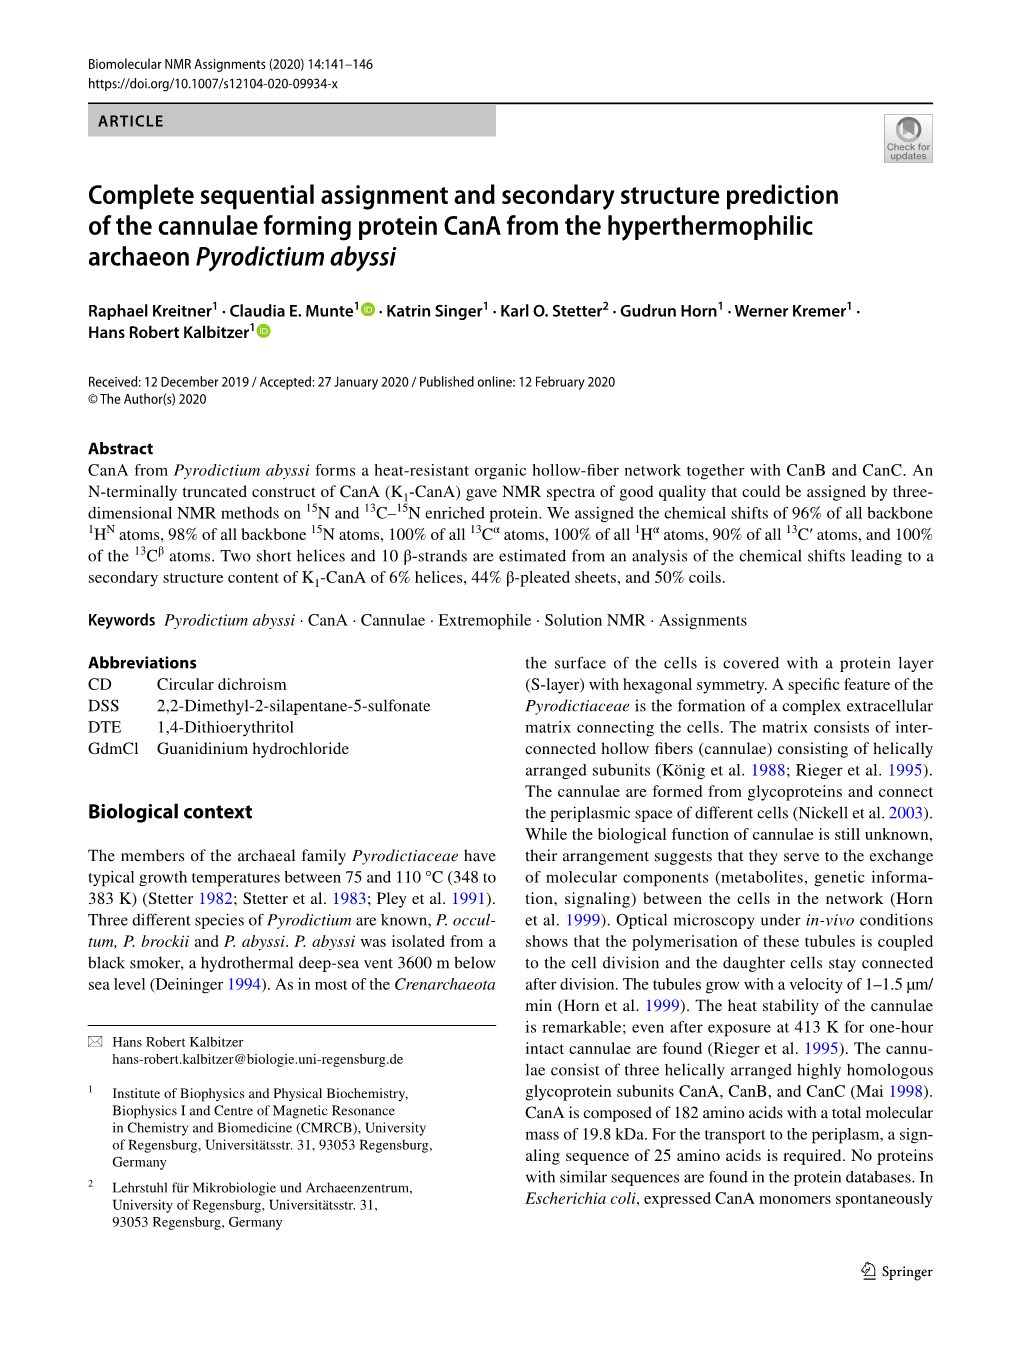 Complete Sequential Assignment and Secondary Structure Prediction of the Cannulae Forming Protein Cana from the Hyperthermophilic Archaeon Pyrodictium Abyssi